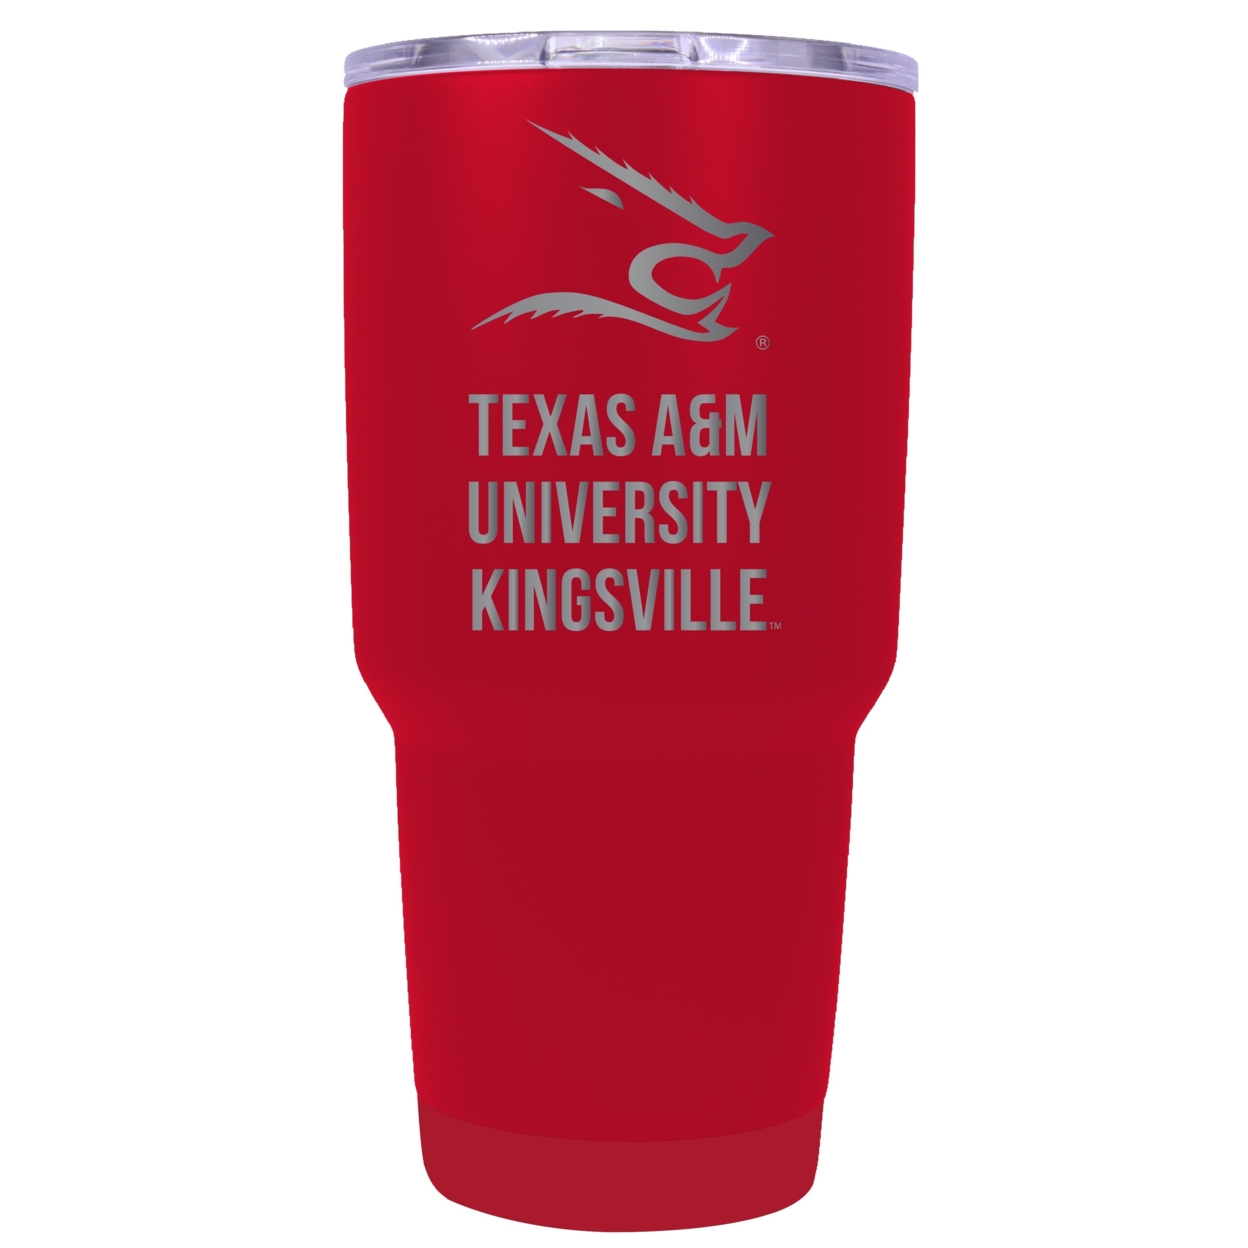 Texas A&M Kingsville Javelinas 24 Oz Laser Engraved Stainless Steel Insulated Tumbler - Choose Your Color. - Coral